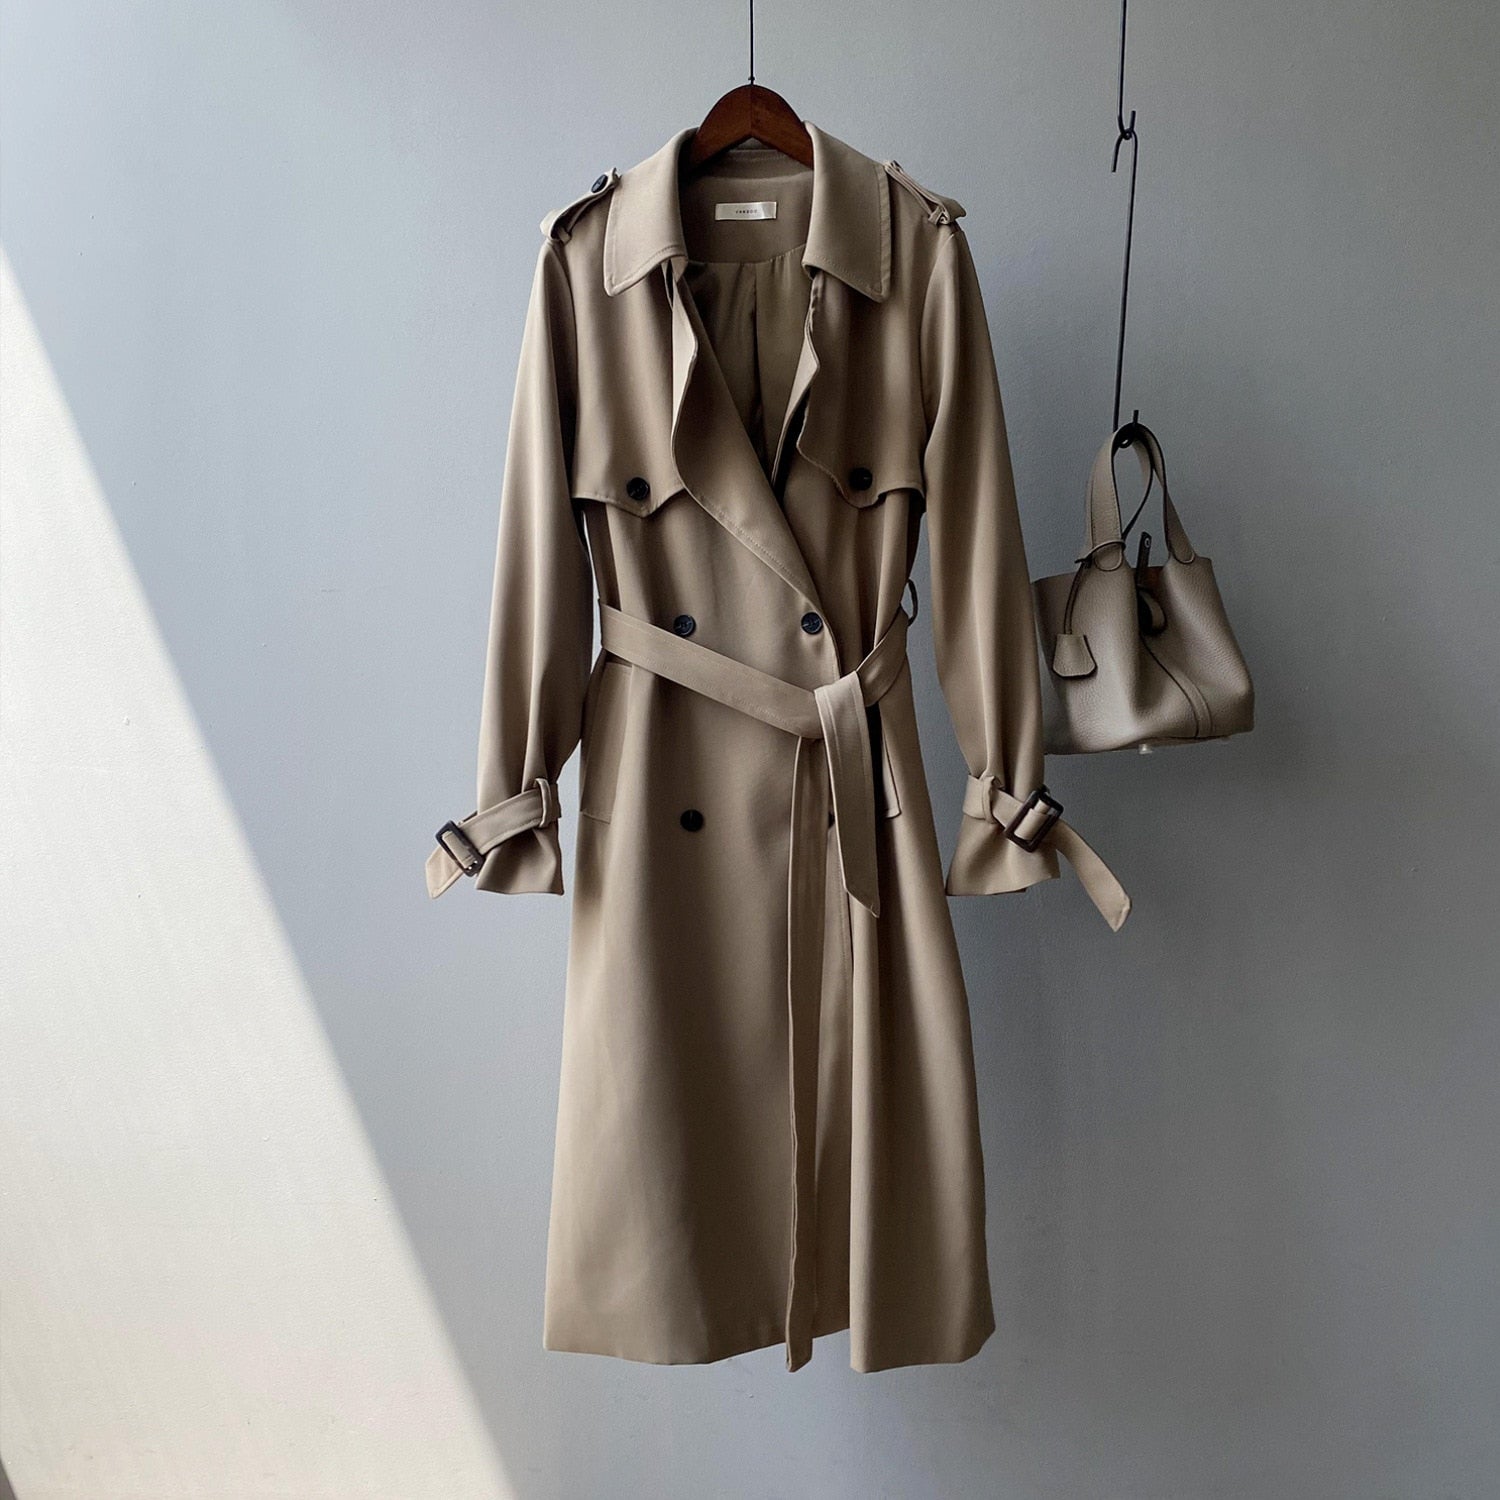 Clacive Solid Color Trench Coat Women Fashion Double Breasted Minimalism Long Jacket Office Lady Loose Winter Coat Female Windbreaker